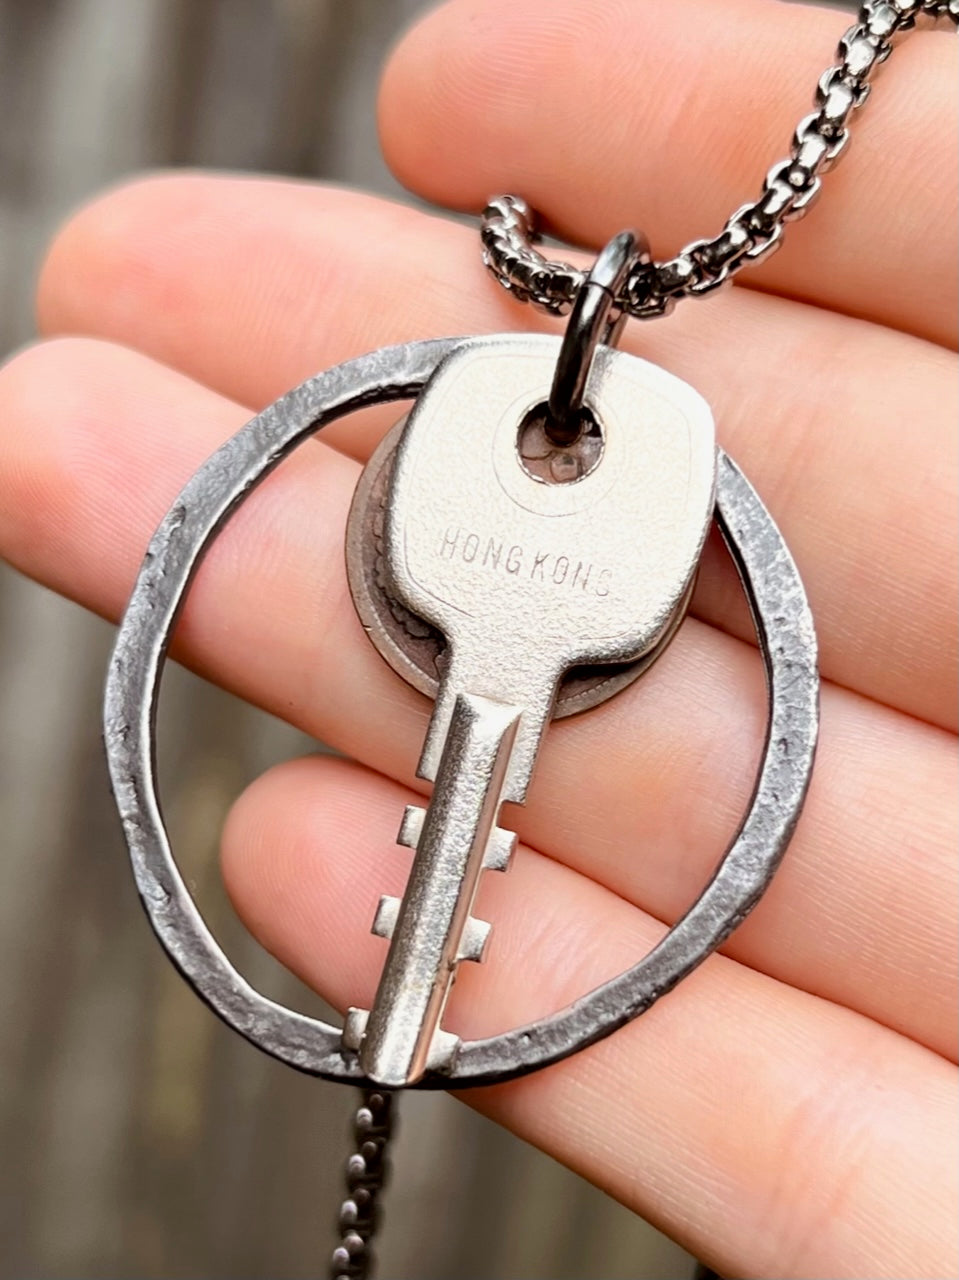 "Open to You and New" 1907 Penny, Vintage Key and Upcycled Ring Necklace